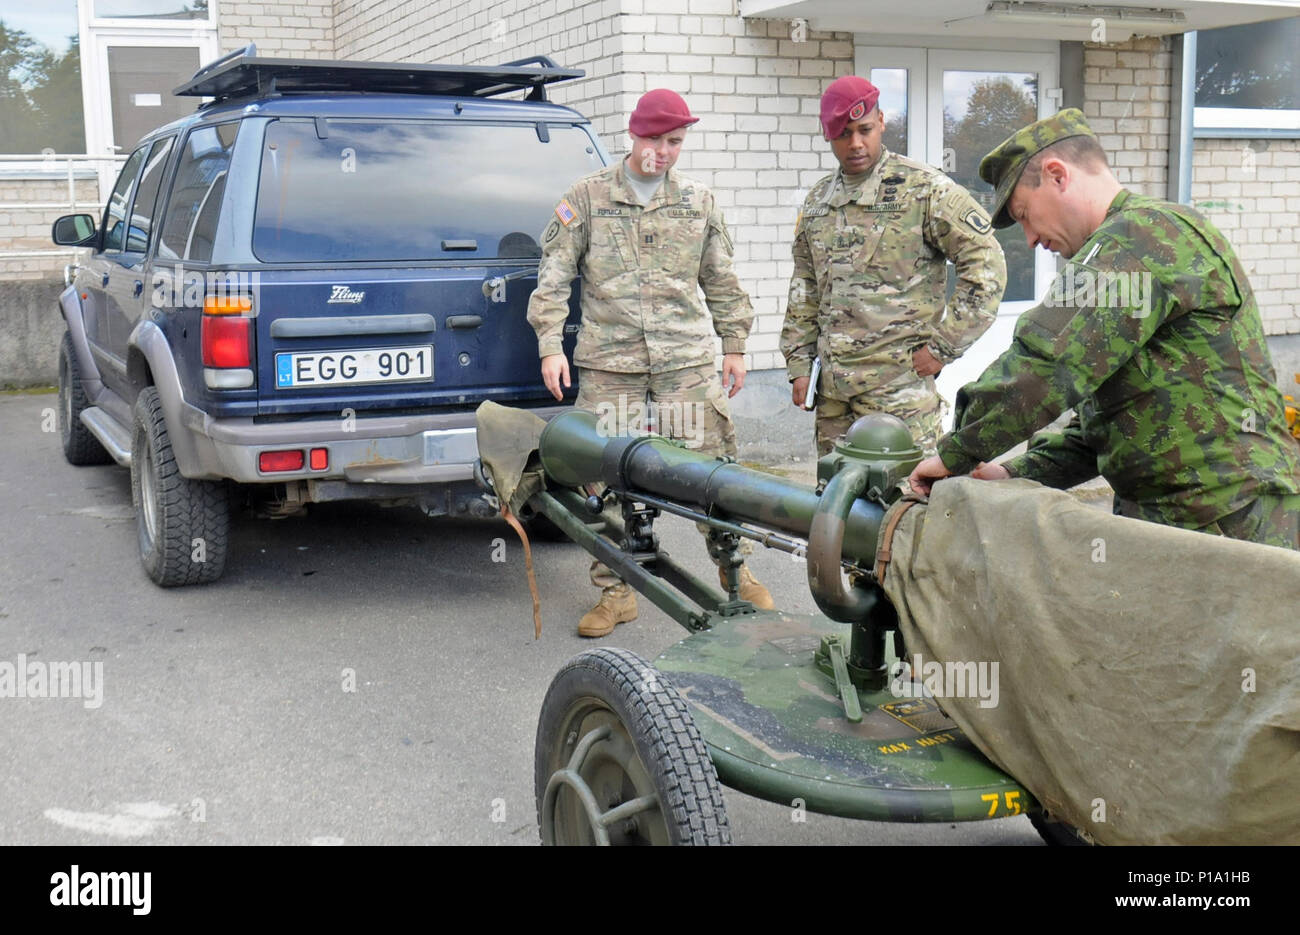 SIAULIAI, Lithuania – A Lithuanian Soldier assigned to the 6th Territorial Unit of Prisikelimo Military District National Guard, shows U.S. Army Capt. Anthony Formica and 1st Sgt., Roberto Ayala a Swedish made Pansarvärnspjäs 1110 90mm recoilless rifle Oct. 1 during a visit to a “safe house” the National Guard was using to practice reconnaissance missions.  Formica and Ayala, the commander and first sergeant of Able Company, 2nd Battalion, 503rd Infantry Regiment, 173rd Airborne Brigade, visited the Lithuanian National Guard to discuss joint training opportunities between the two units. The Li Stock Photo